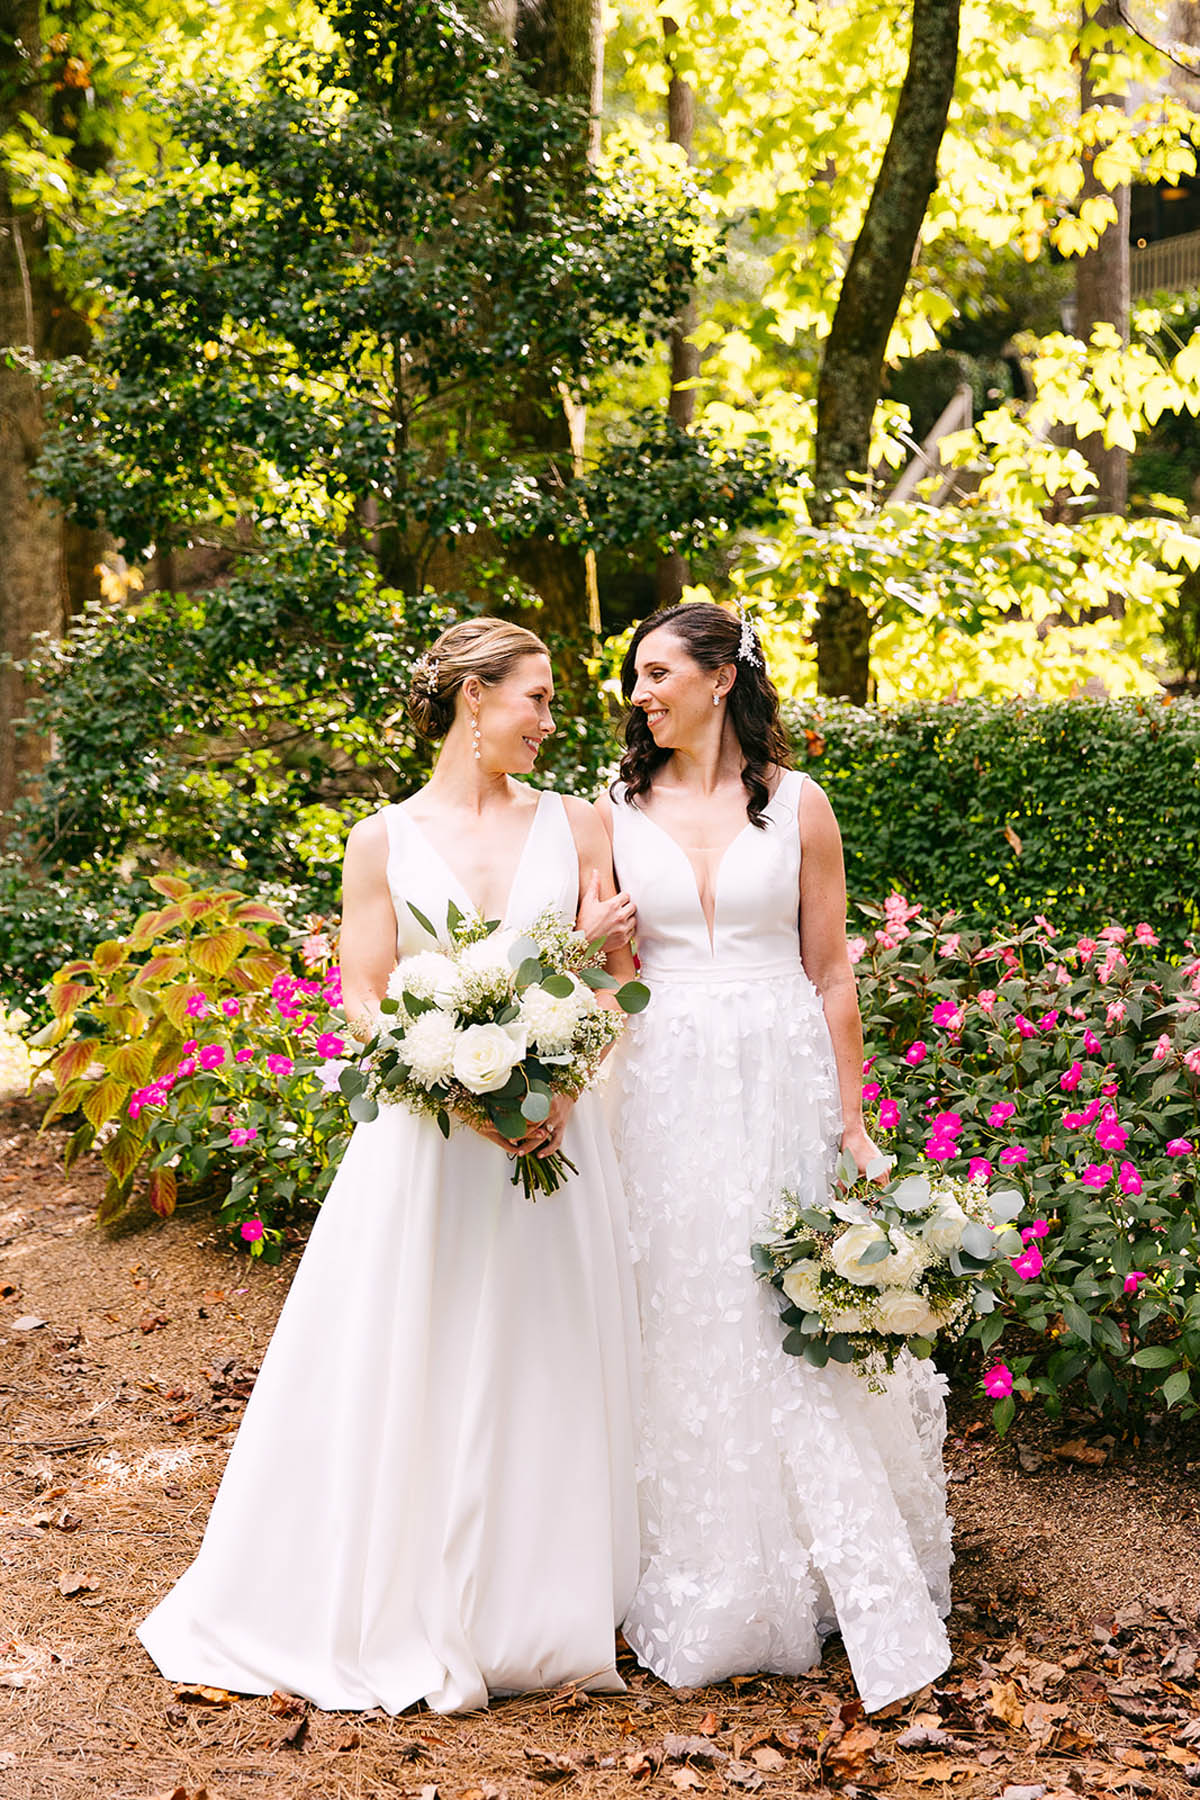 Two brides stand side by side and hold bouquets of white flowers.